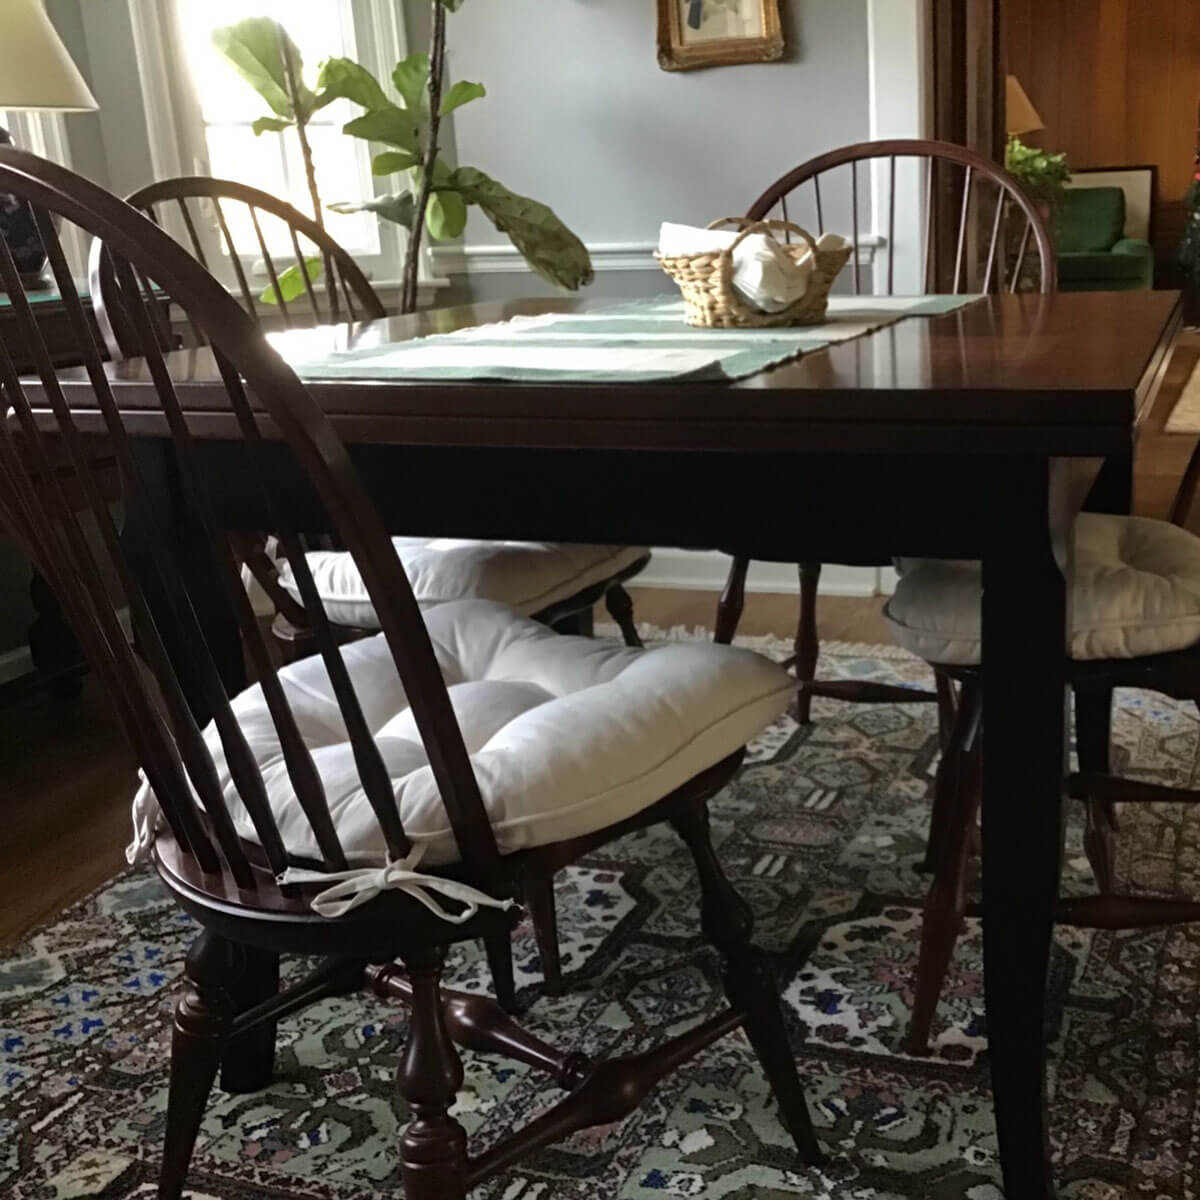 thick chair cushions of natural cotton on windsor chairs in traditional dining room